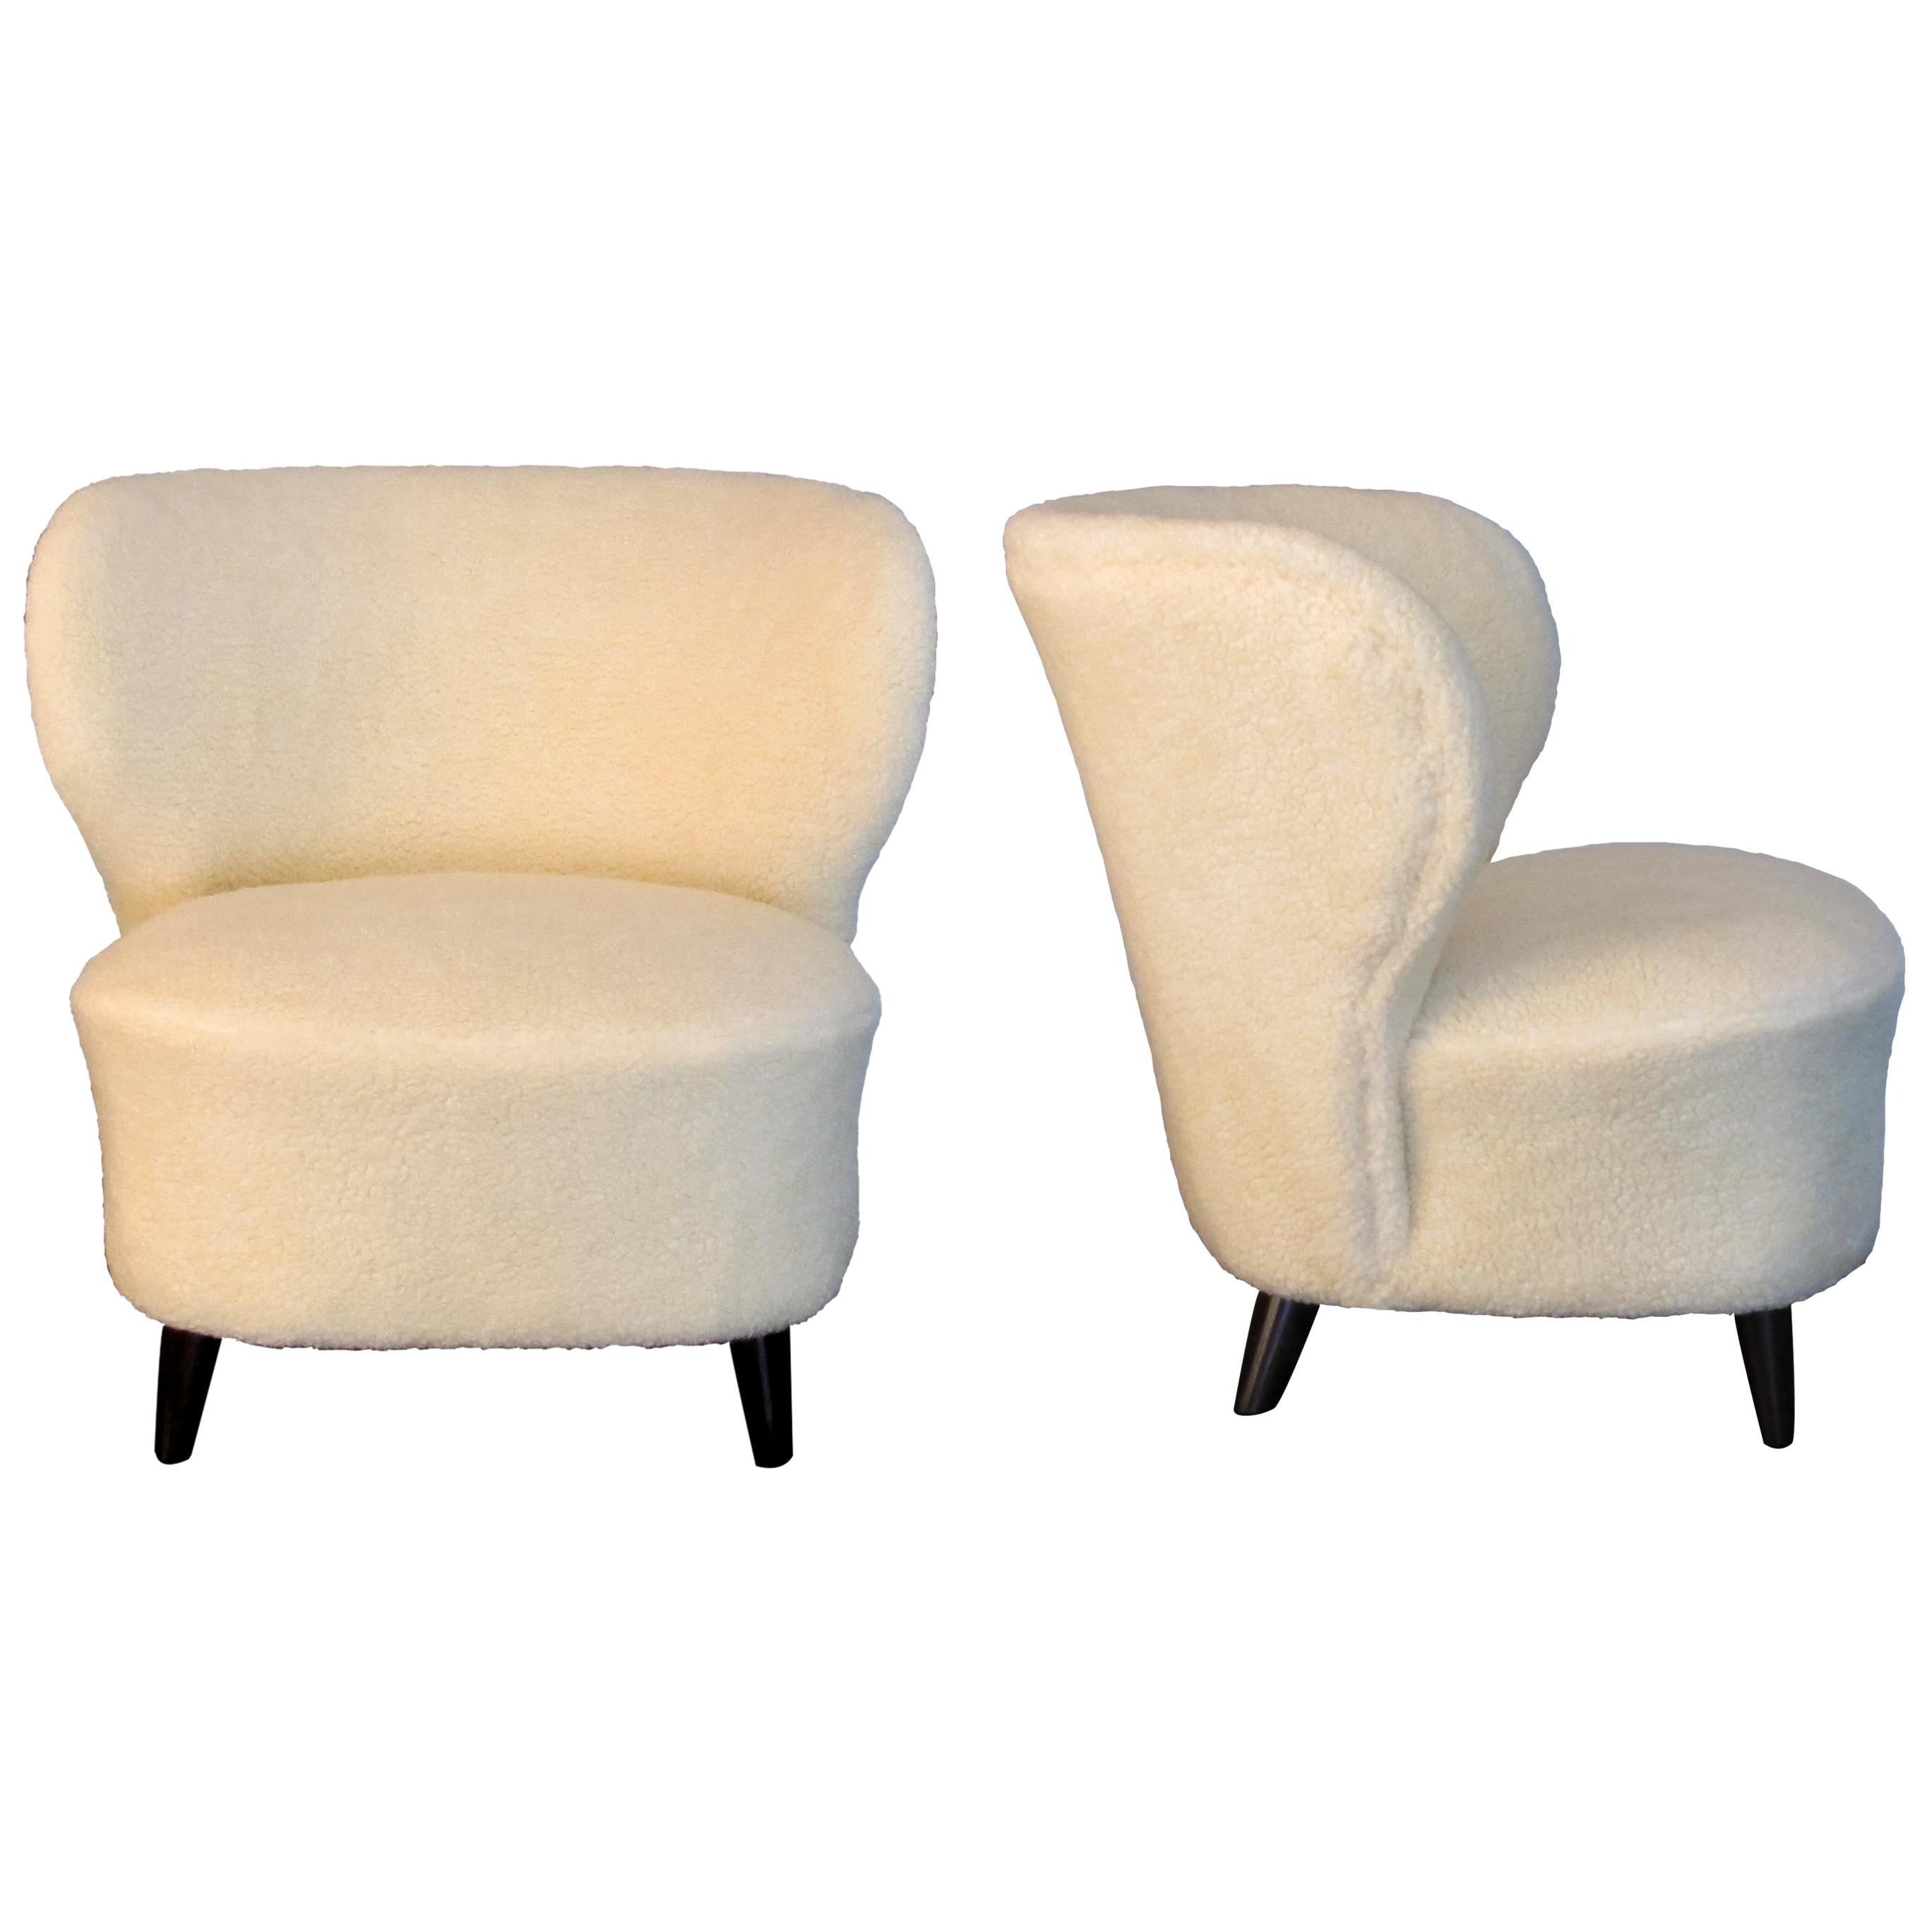 Pair of 1940s deep-seated armchairs with a very generous curved wing backrest. These Scandinavian armchairs have good proportions are well-padded and very comfortable. These armchairs have been newly reupholstered in a really soft lambskin mix